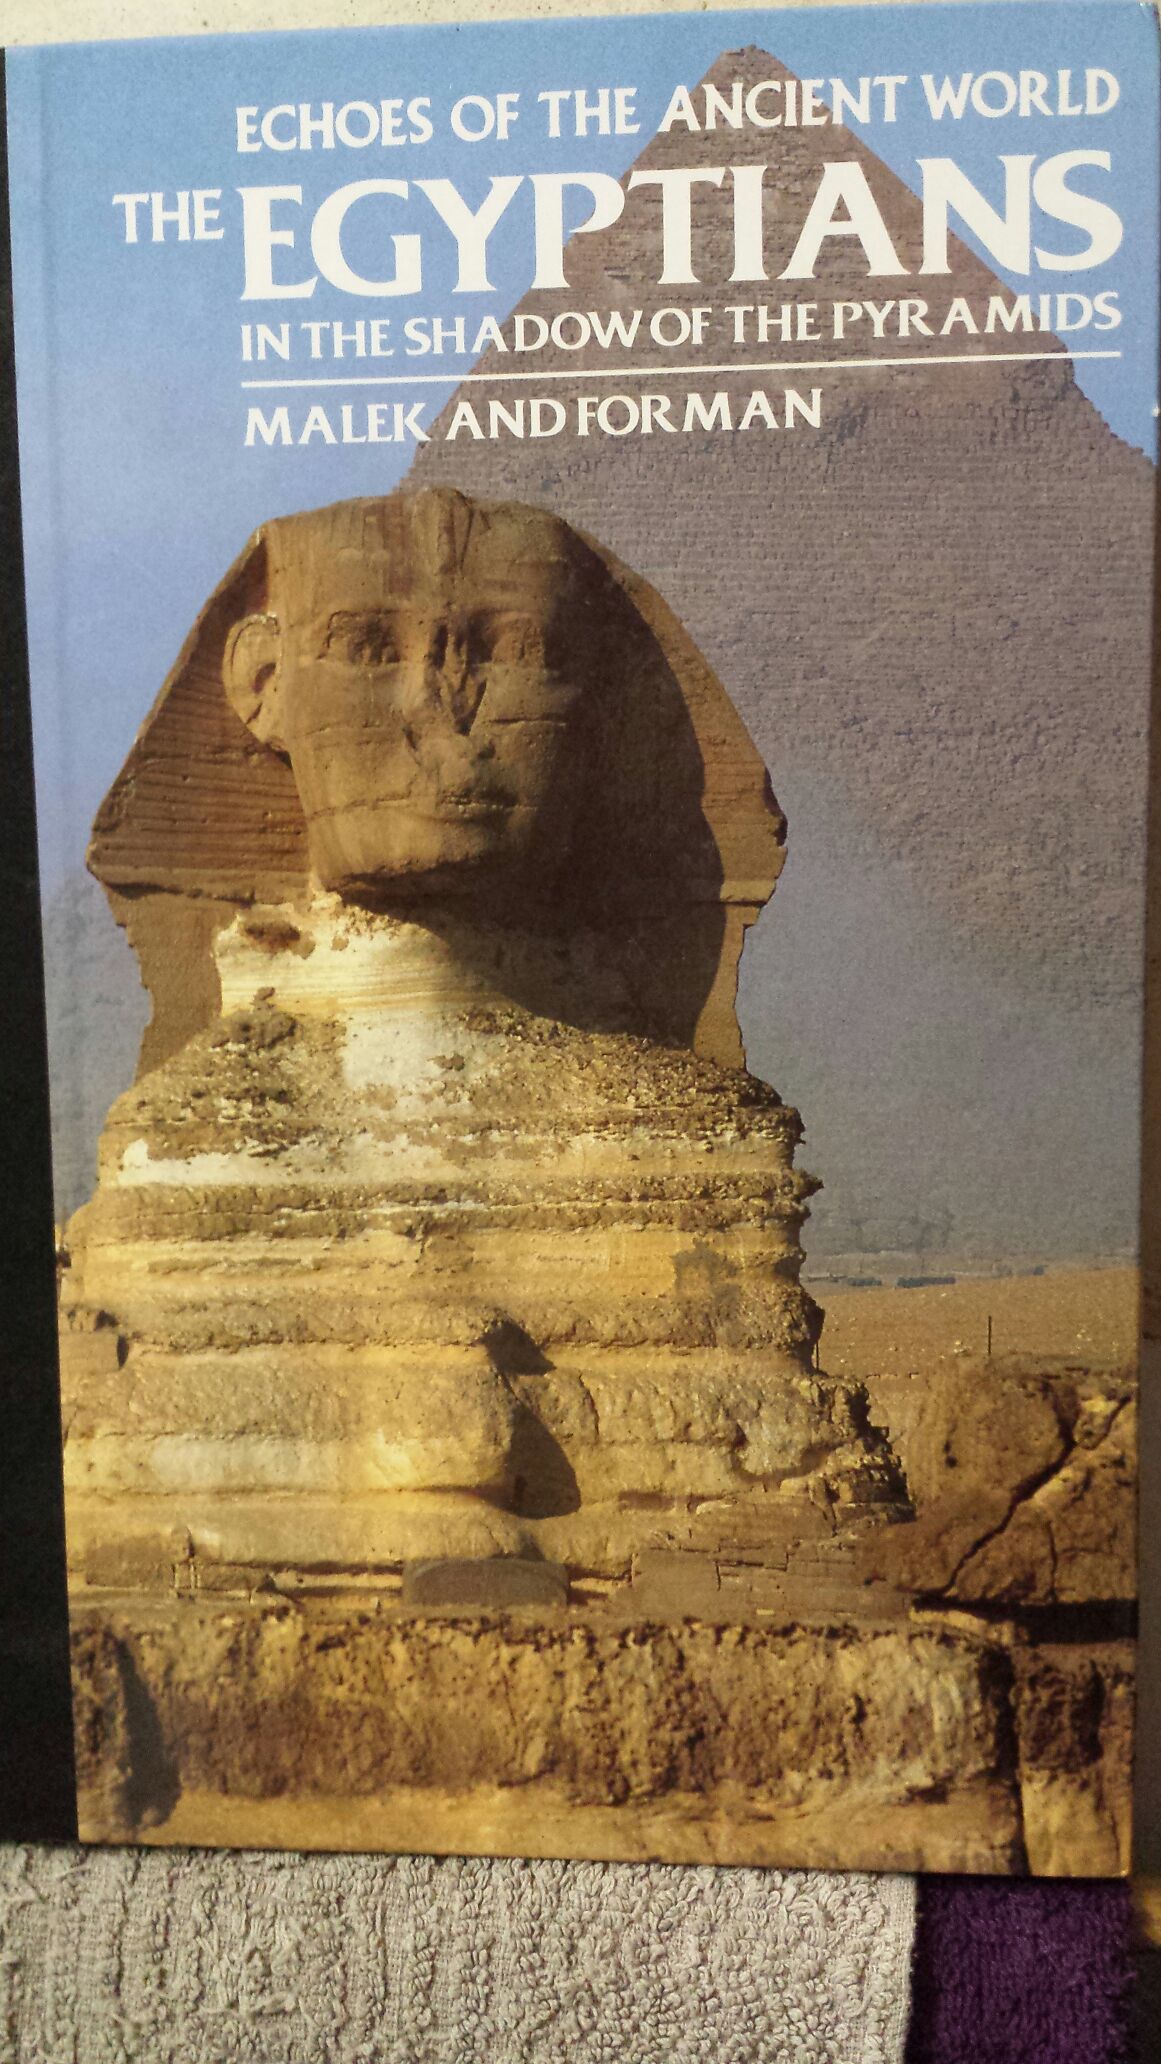 The Egyptians In The Shadow Of The Pyramids - Jaromir Malek (Golden - Hardcover) book collectible - Main Image 1